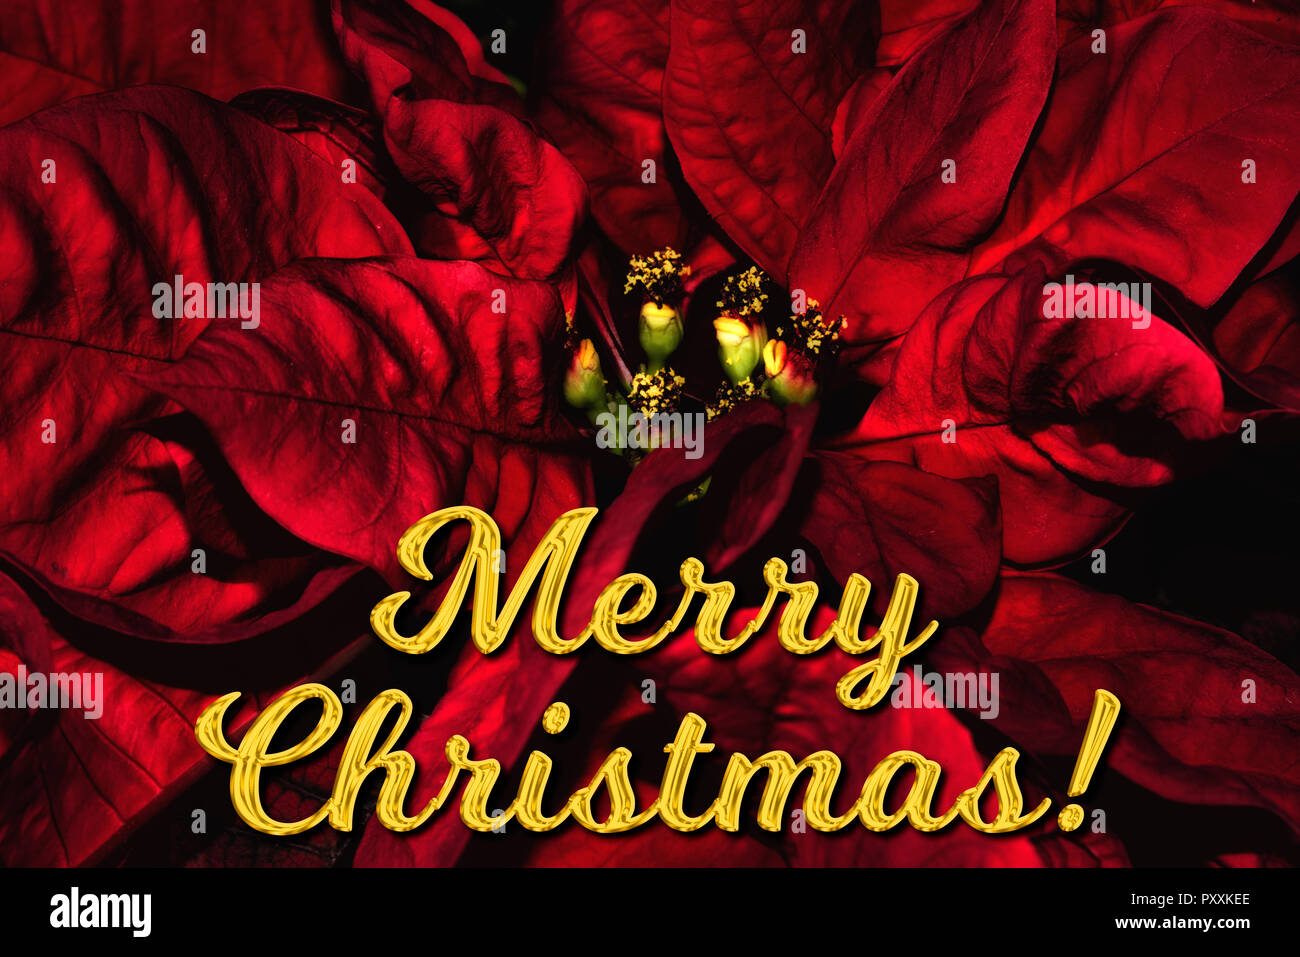 English text 'Merry Christmas' in front of a red poinsettia. The perfect holiday season greetings card. Stock Photo